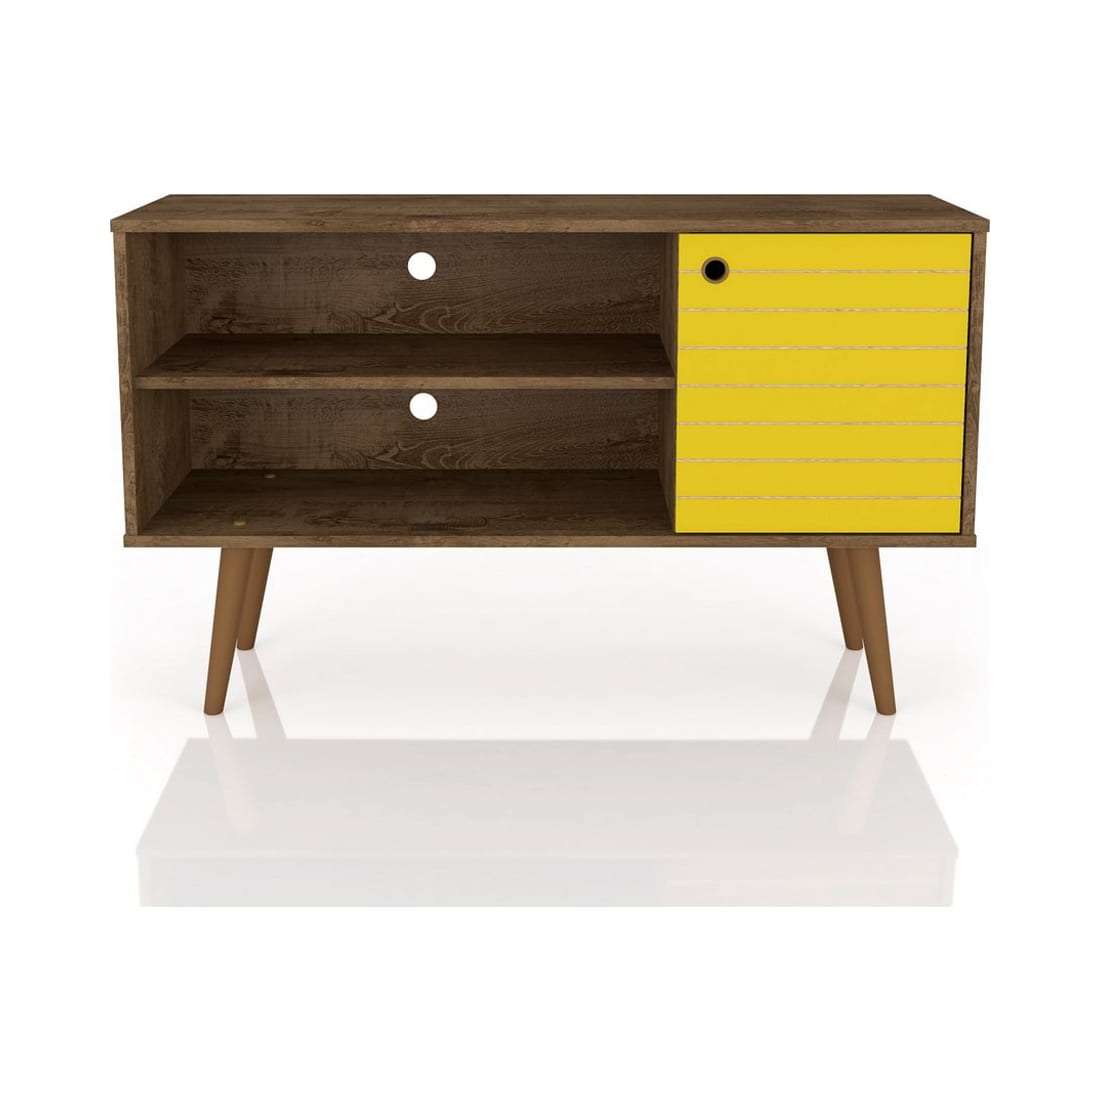 Liberty 42.52" TV Stand in Rustic Brown and Yellow